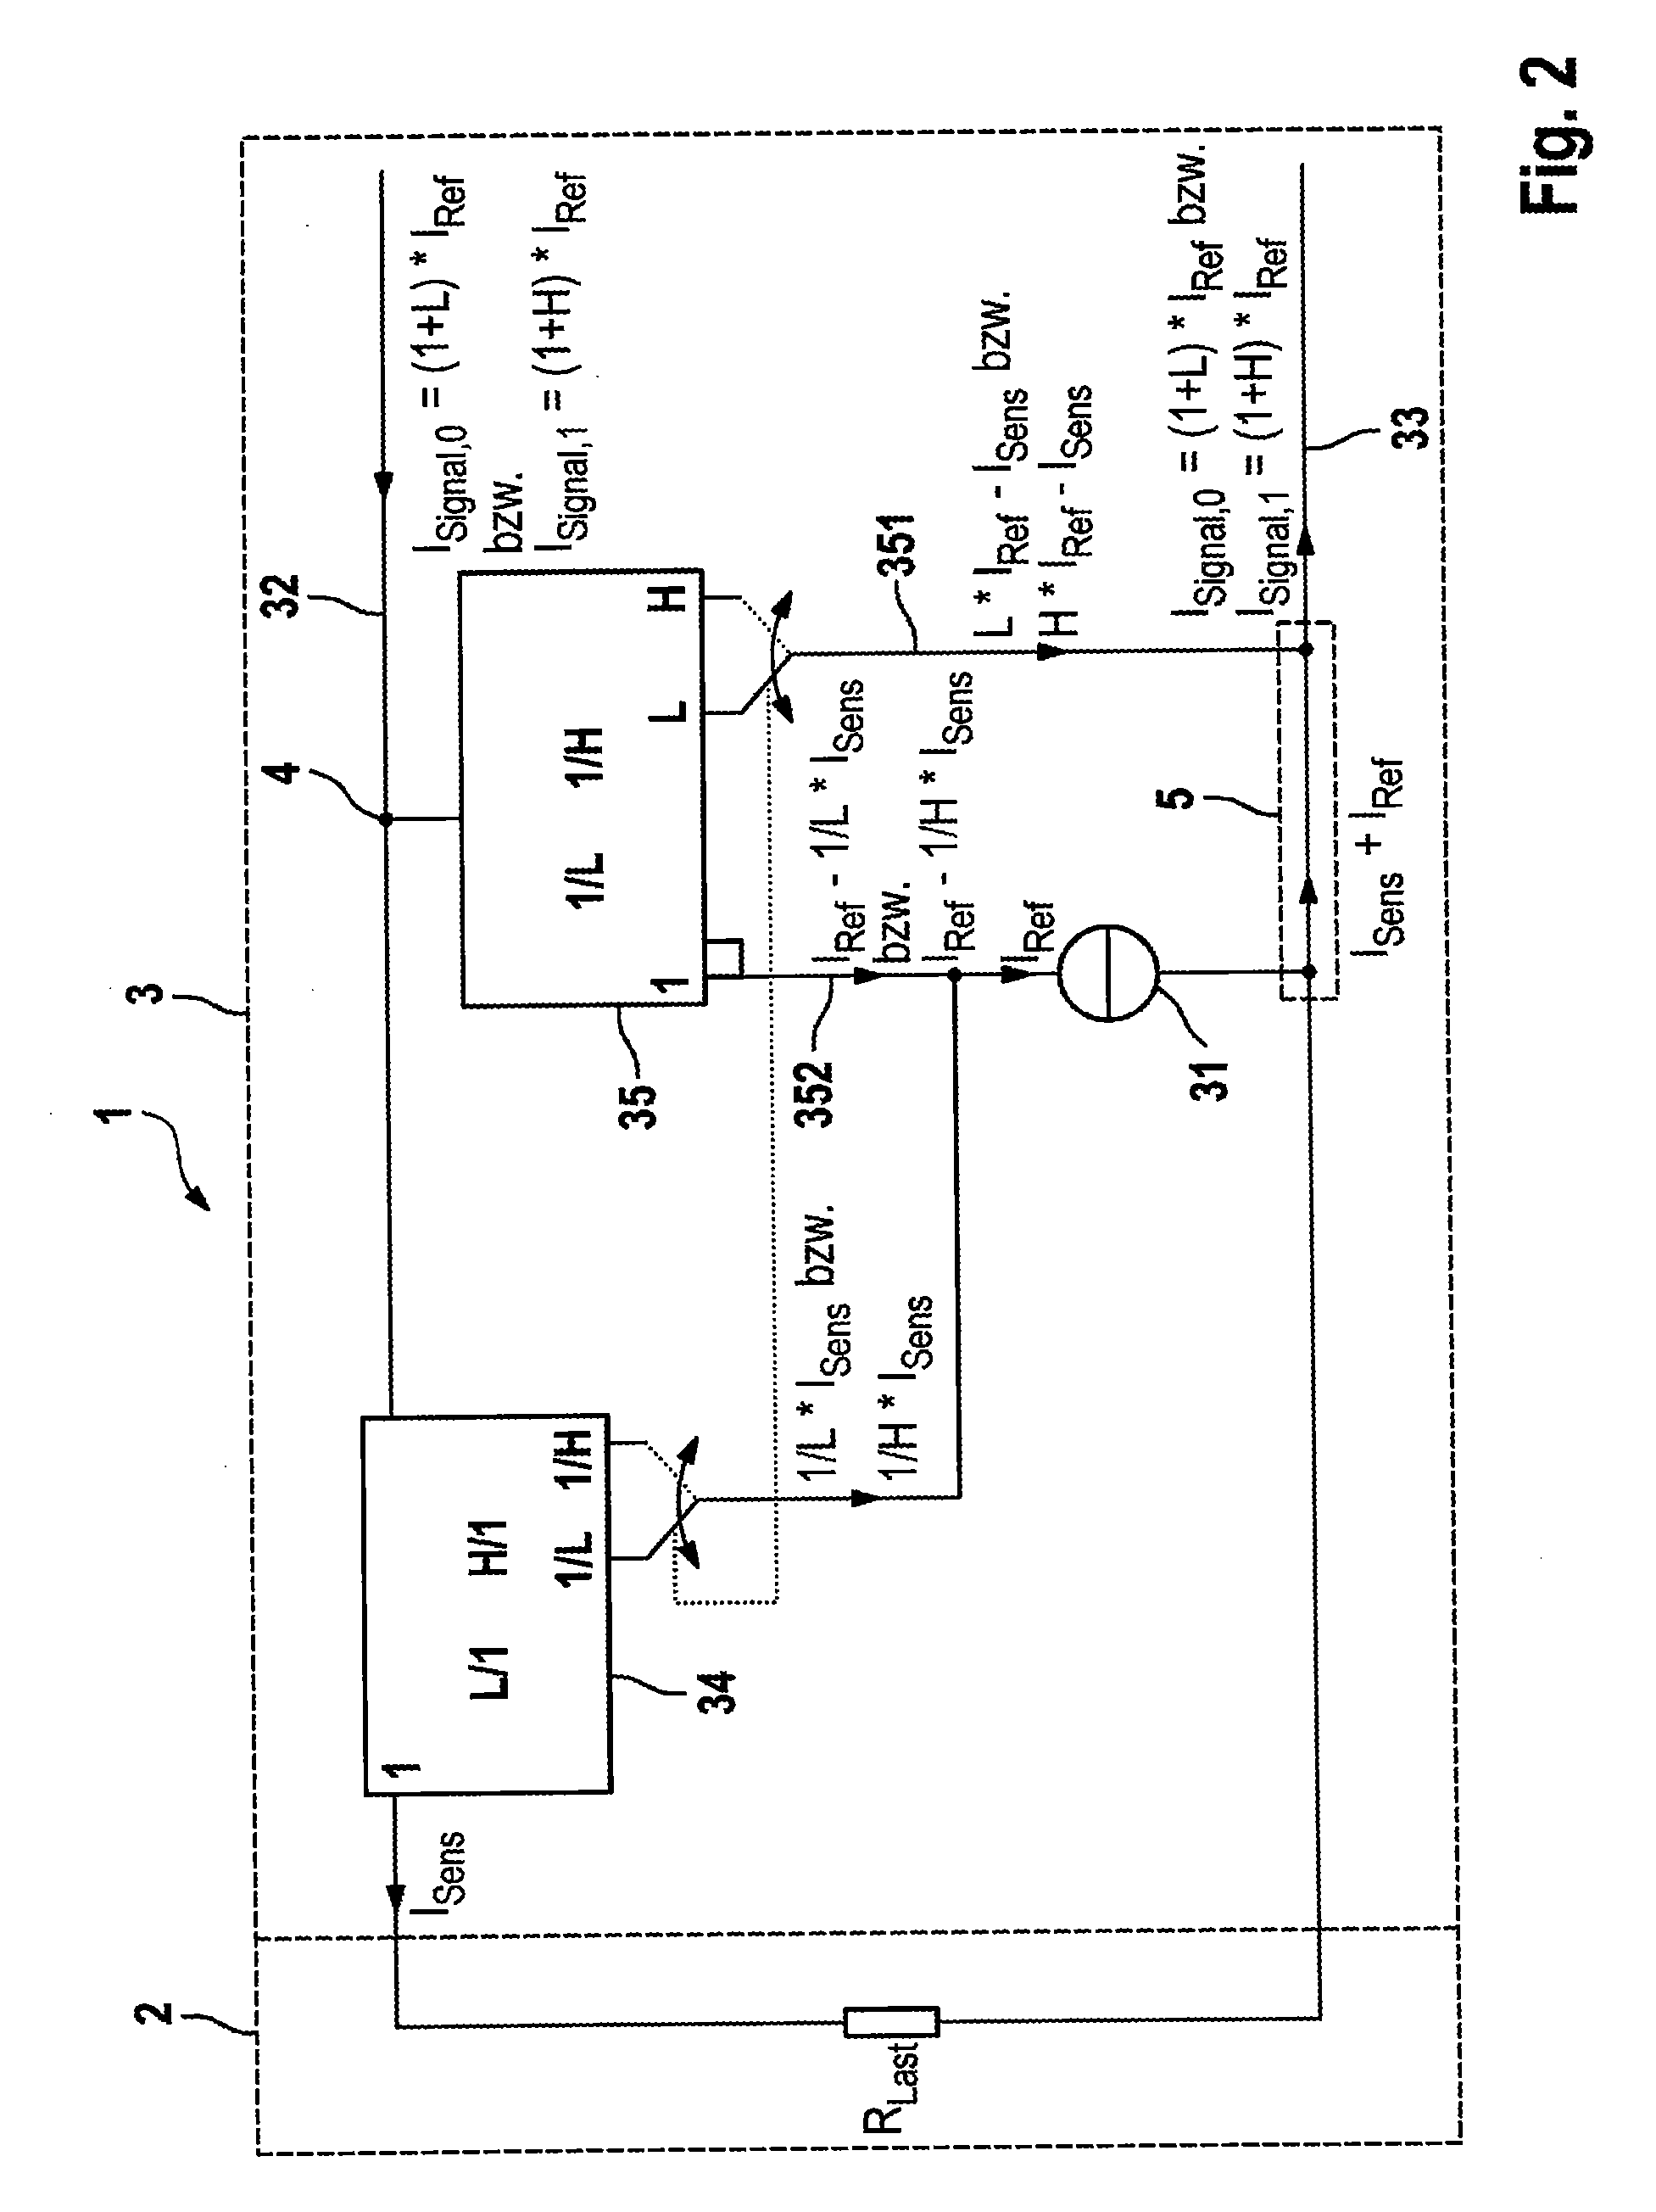 Active Sensor, Use Thereof and Method for Compensating Amplitude Fluctuations in the Output Current Signal of an Active Sensor